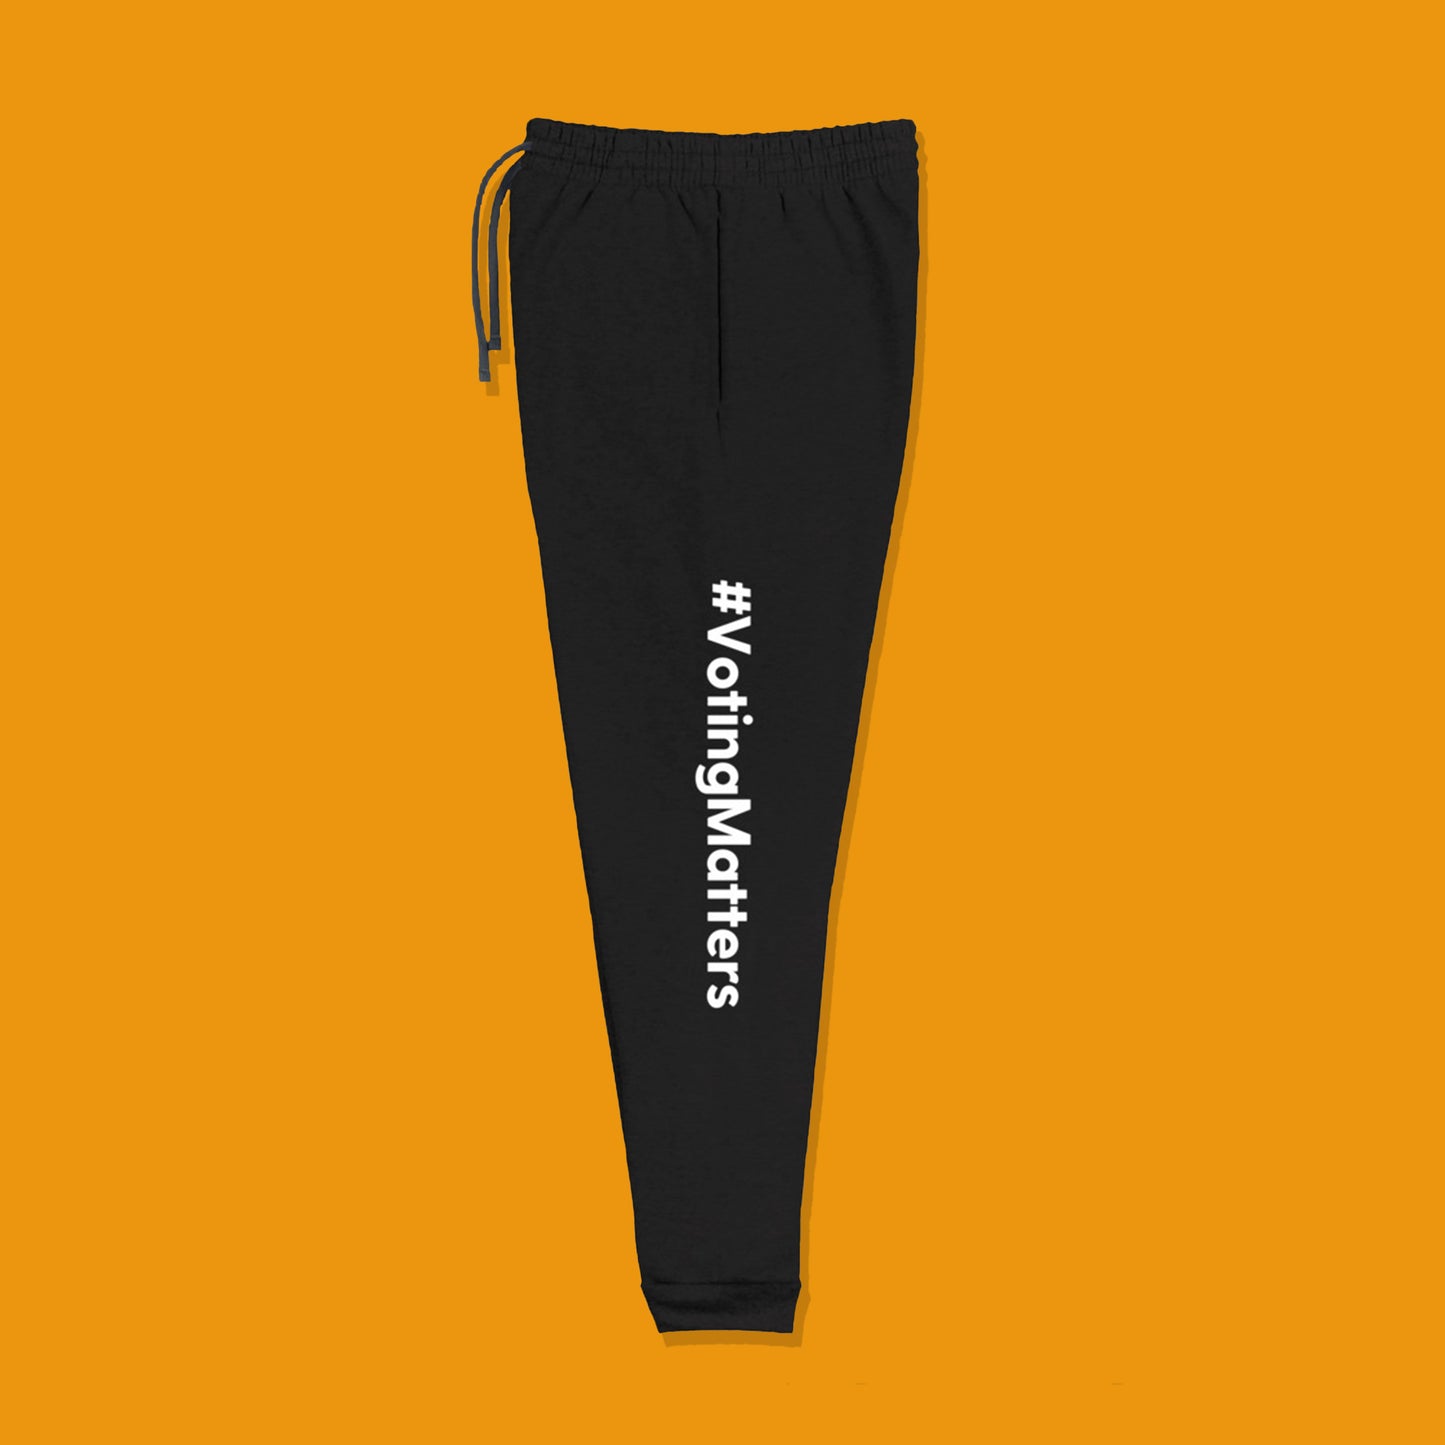 black cotton sweatpants with hashtag voting matters printed lengthwise on the left leg of pants